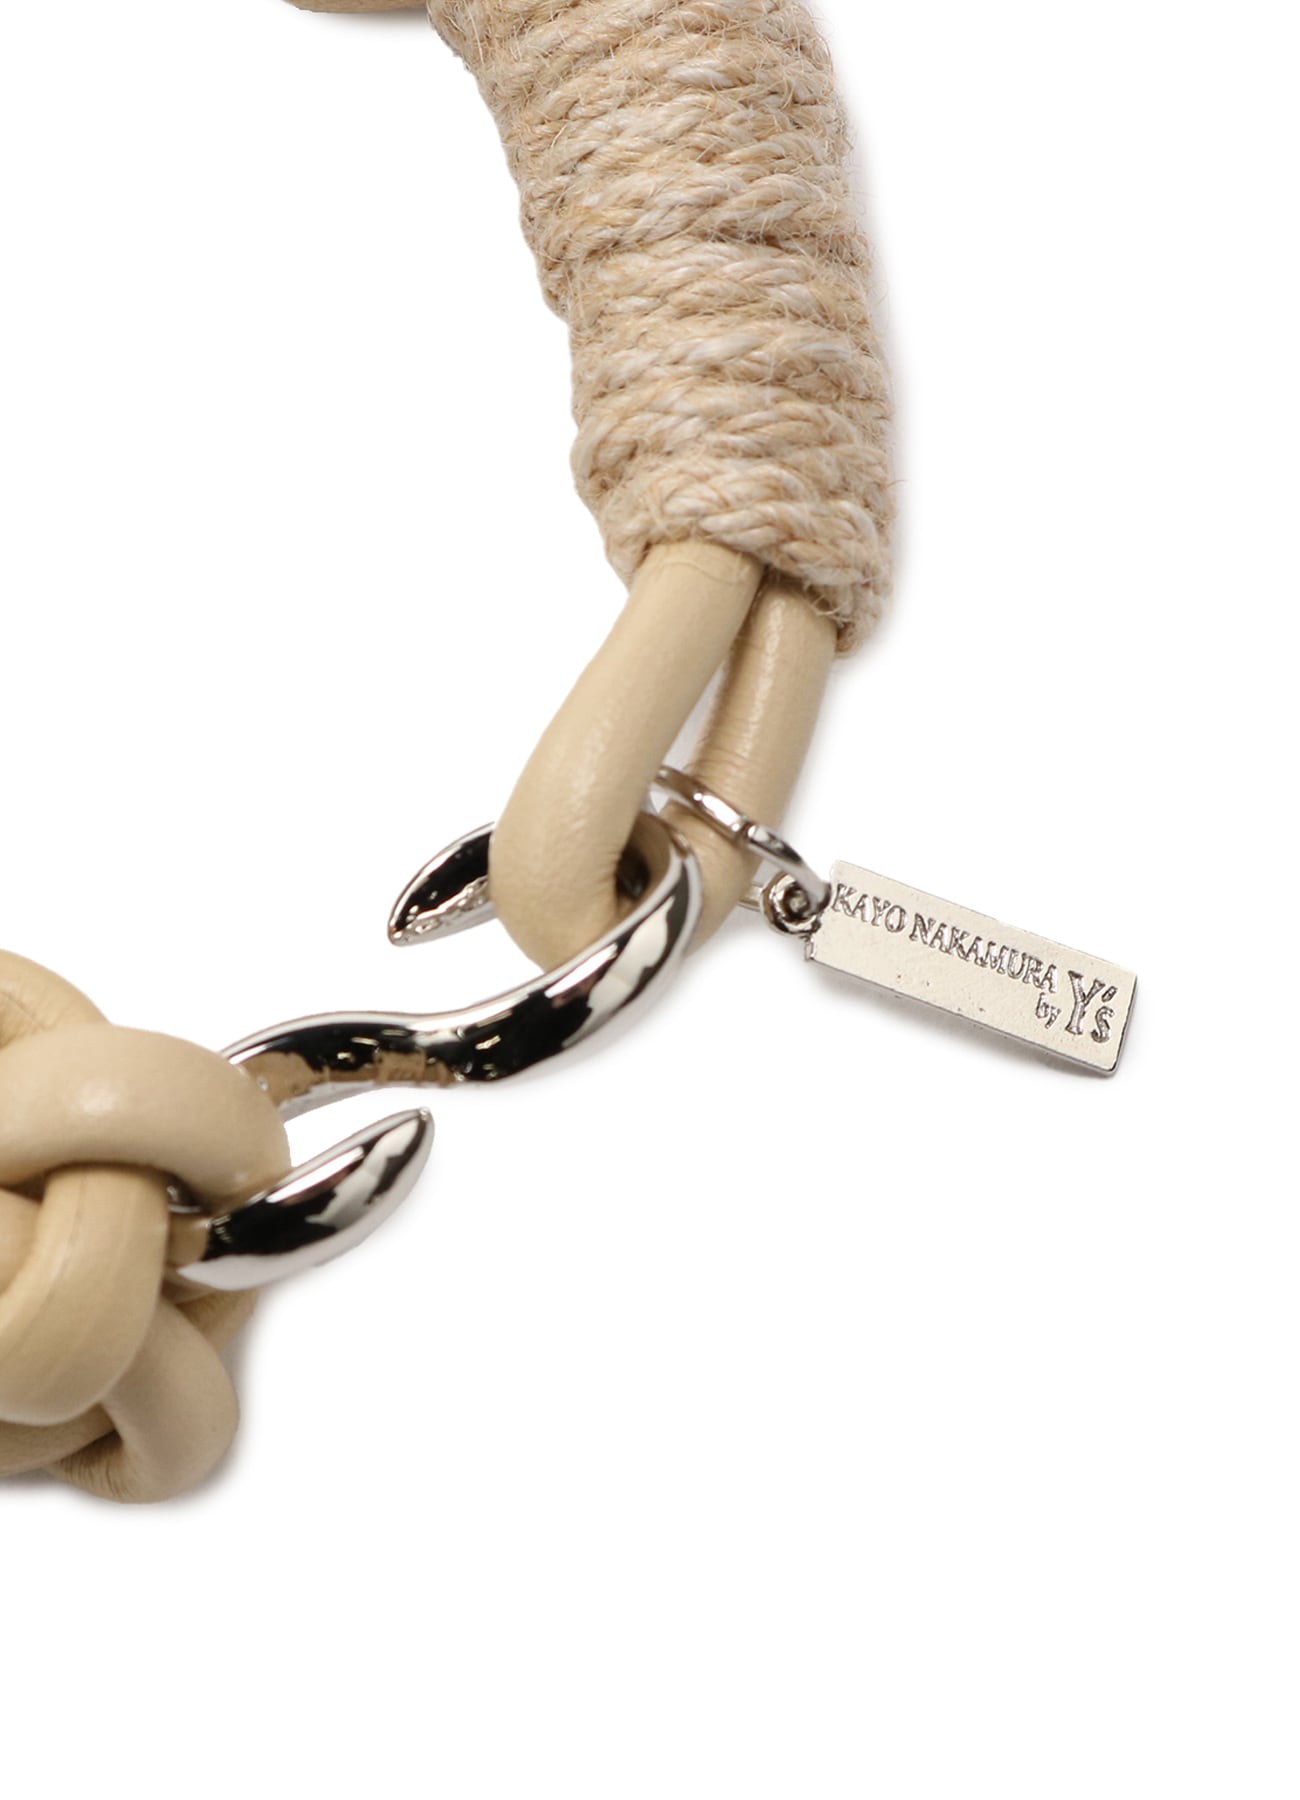 LEATHER CODE LEATHER CORD BRACELET